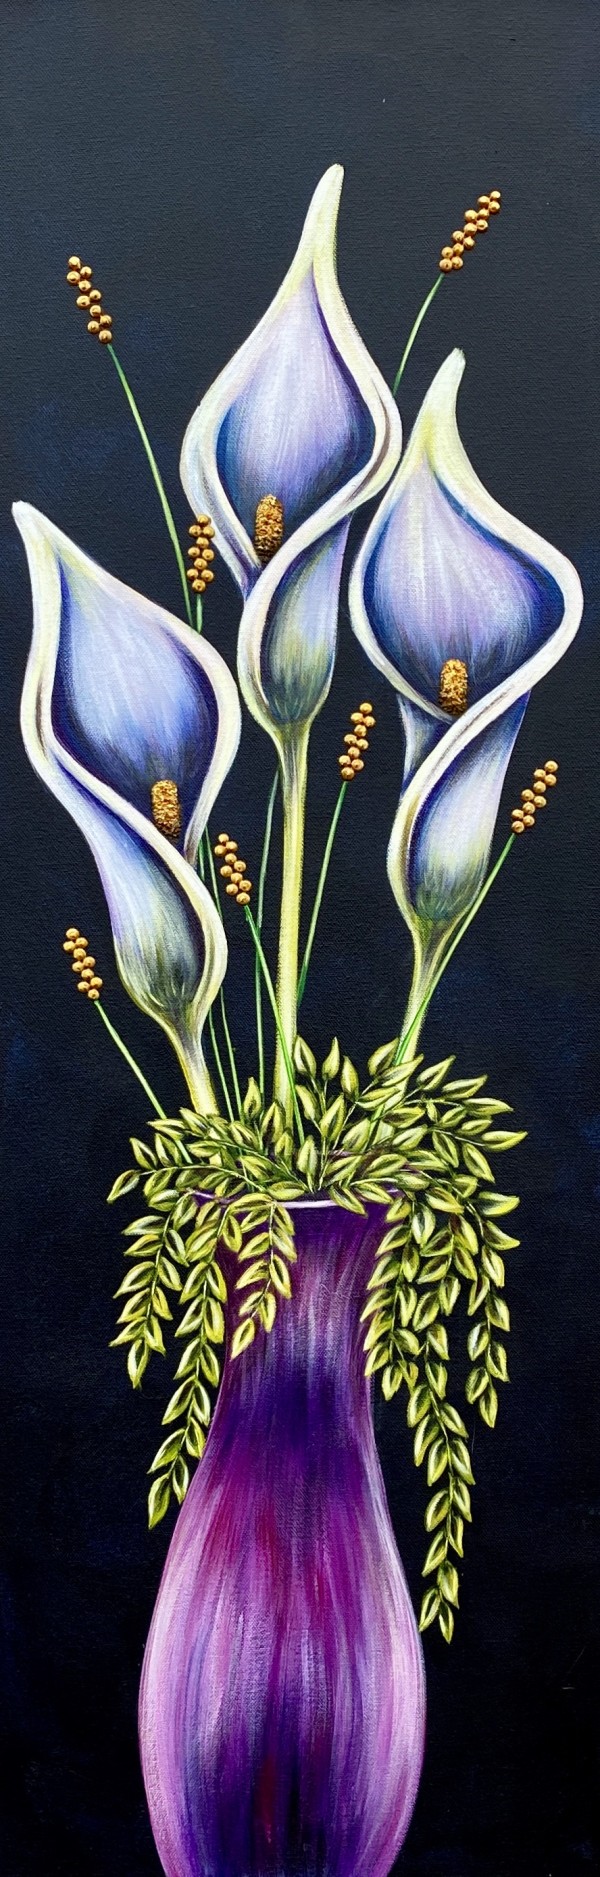 Potted Calla Lilies #1219 by Denise Cassidy Wood